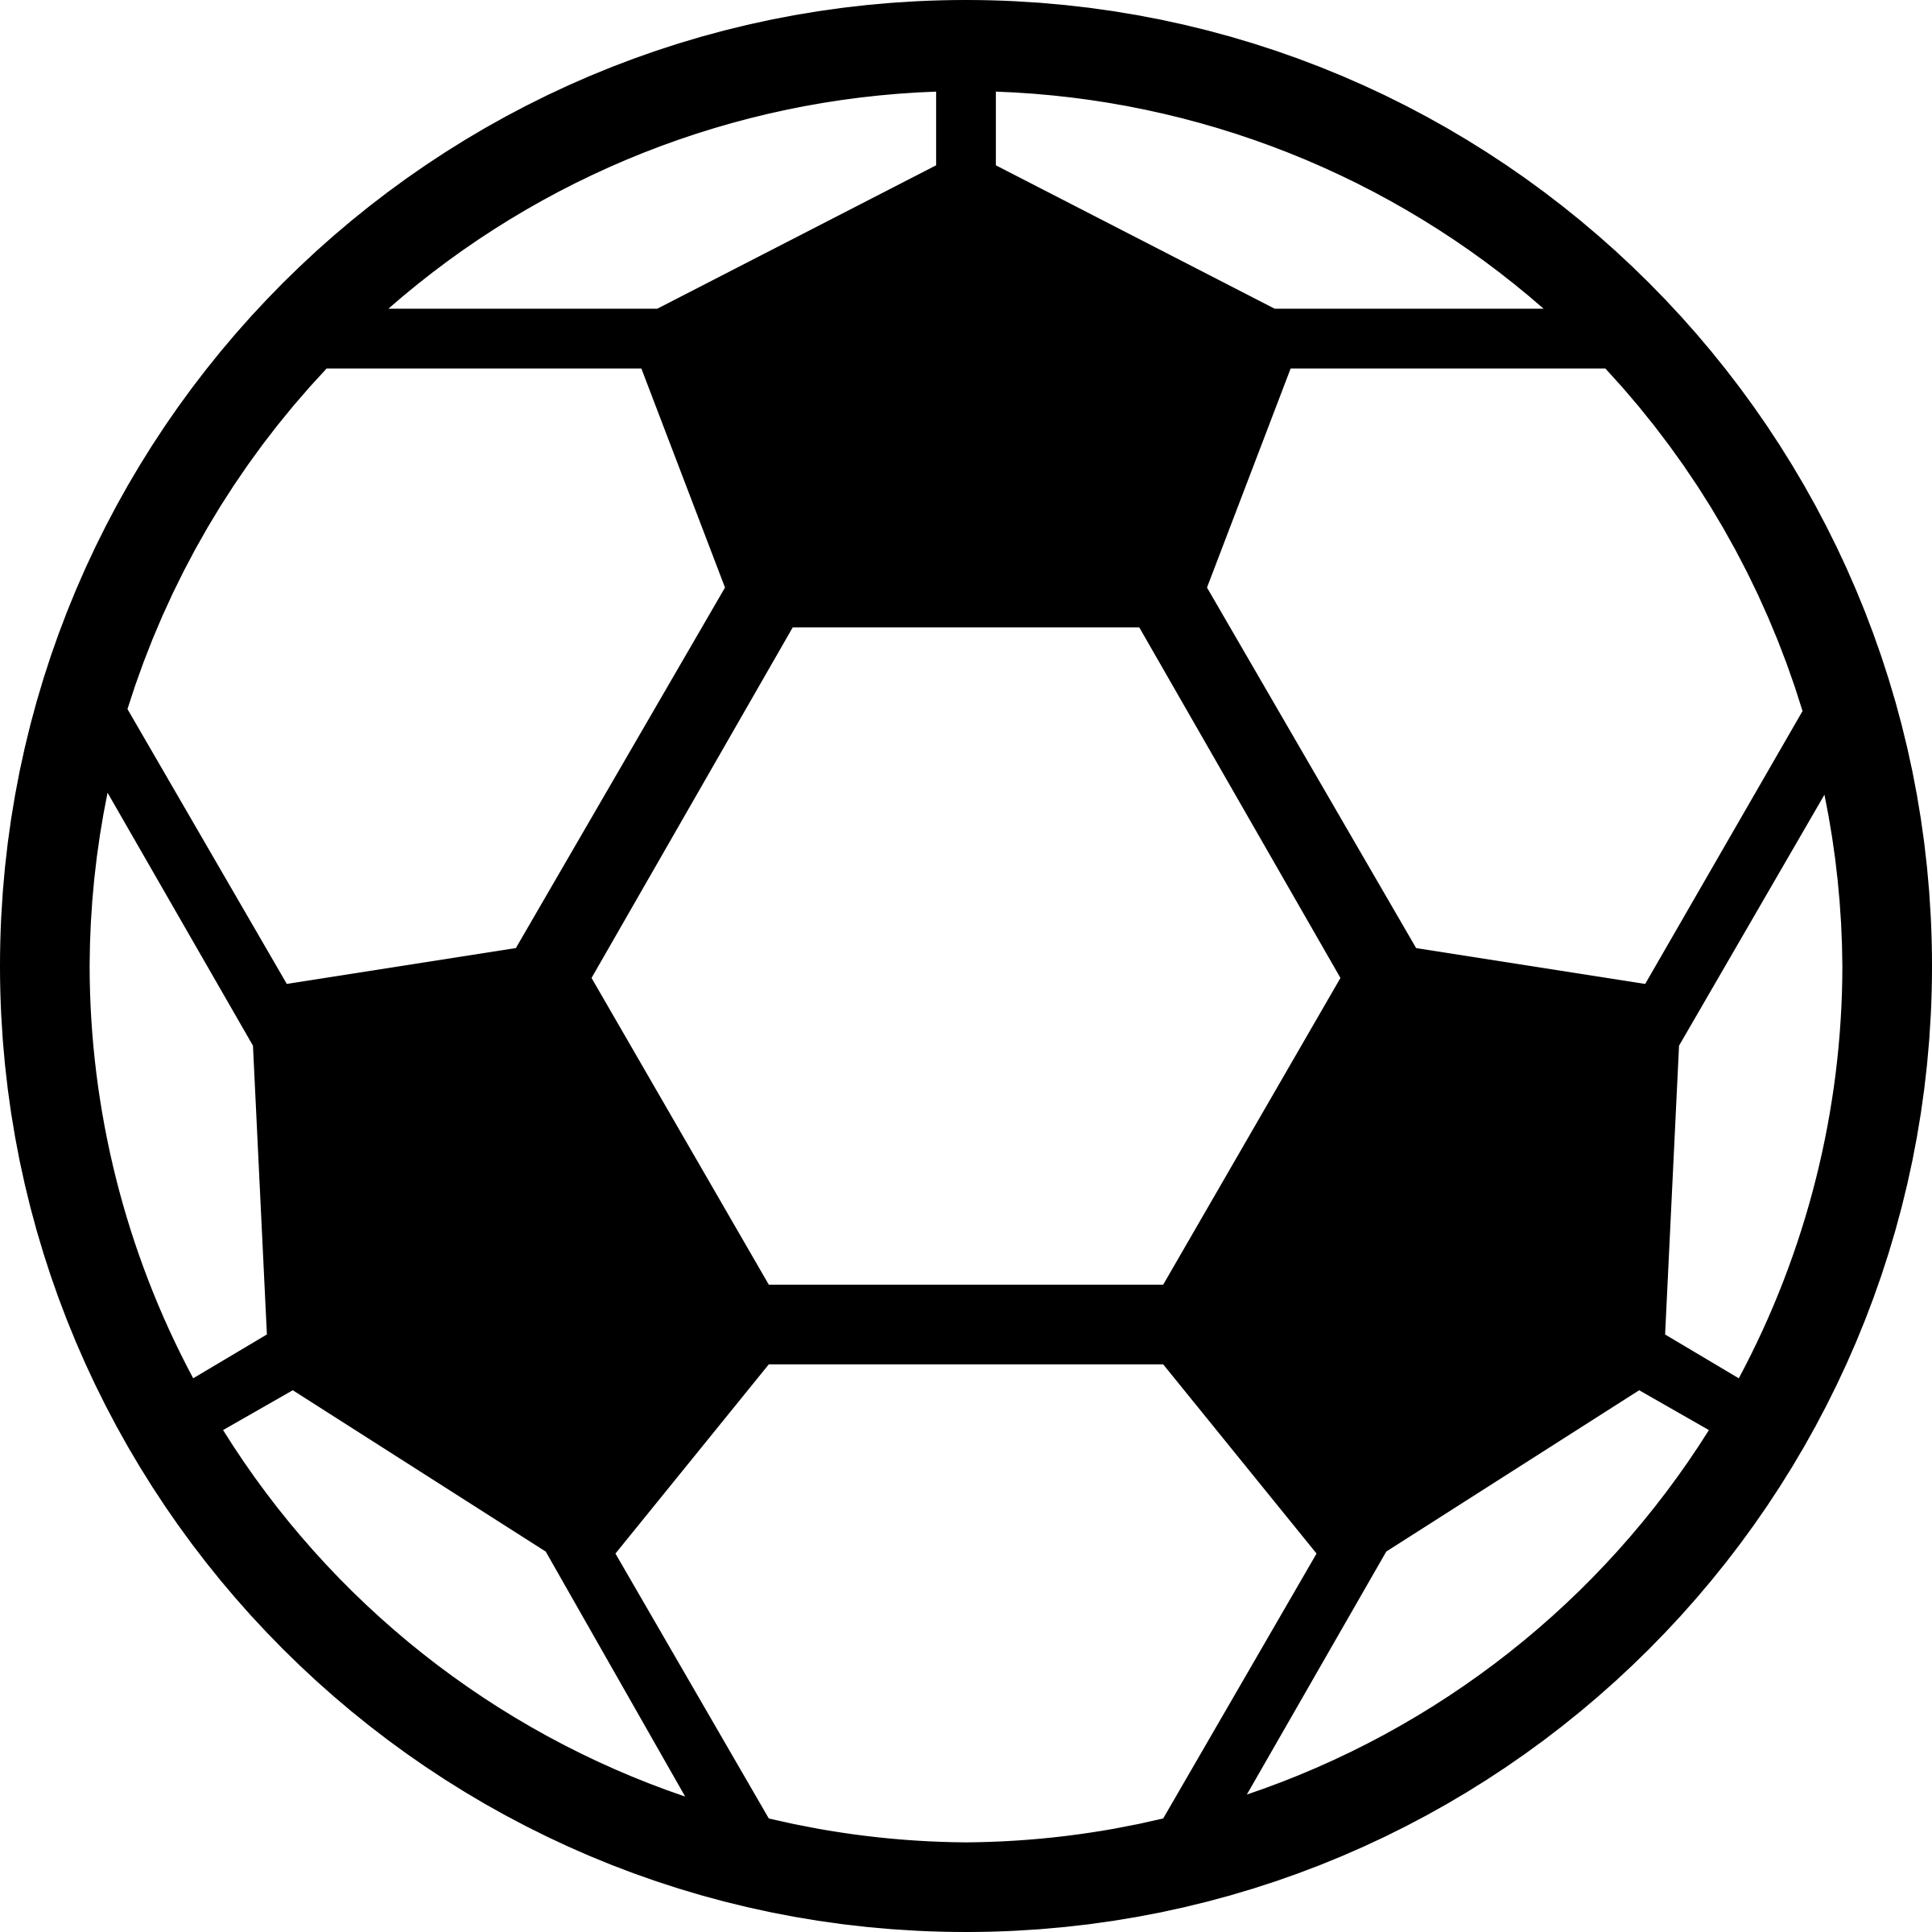 Soccer ball clip art free large images 3 clipartix 2 - Cliparting.com